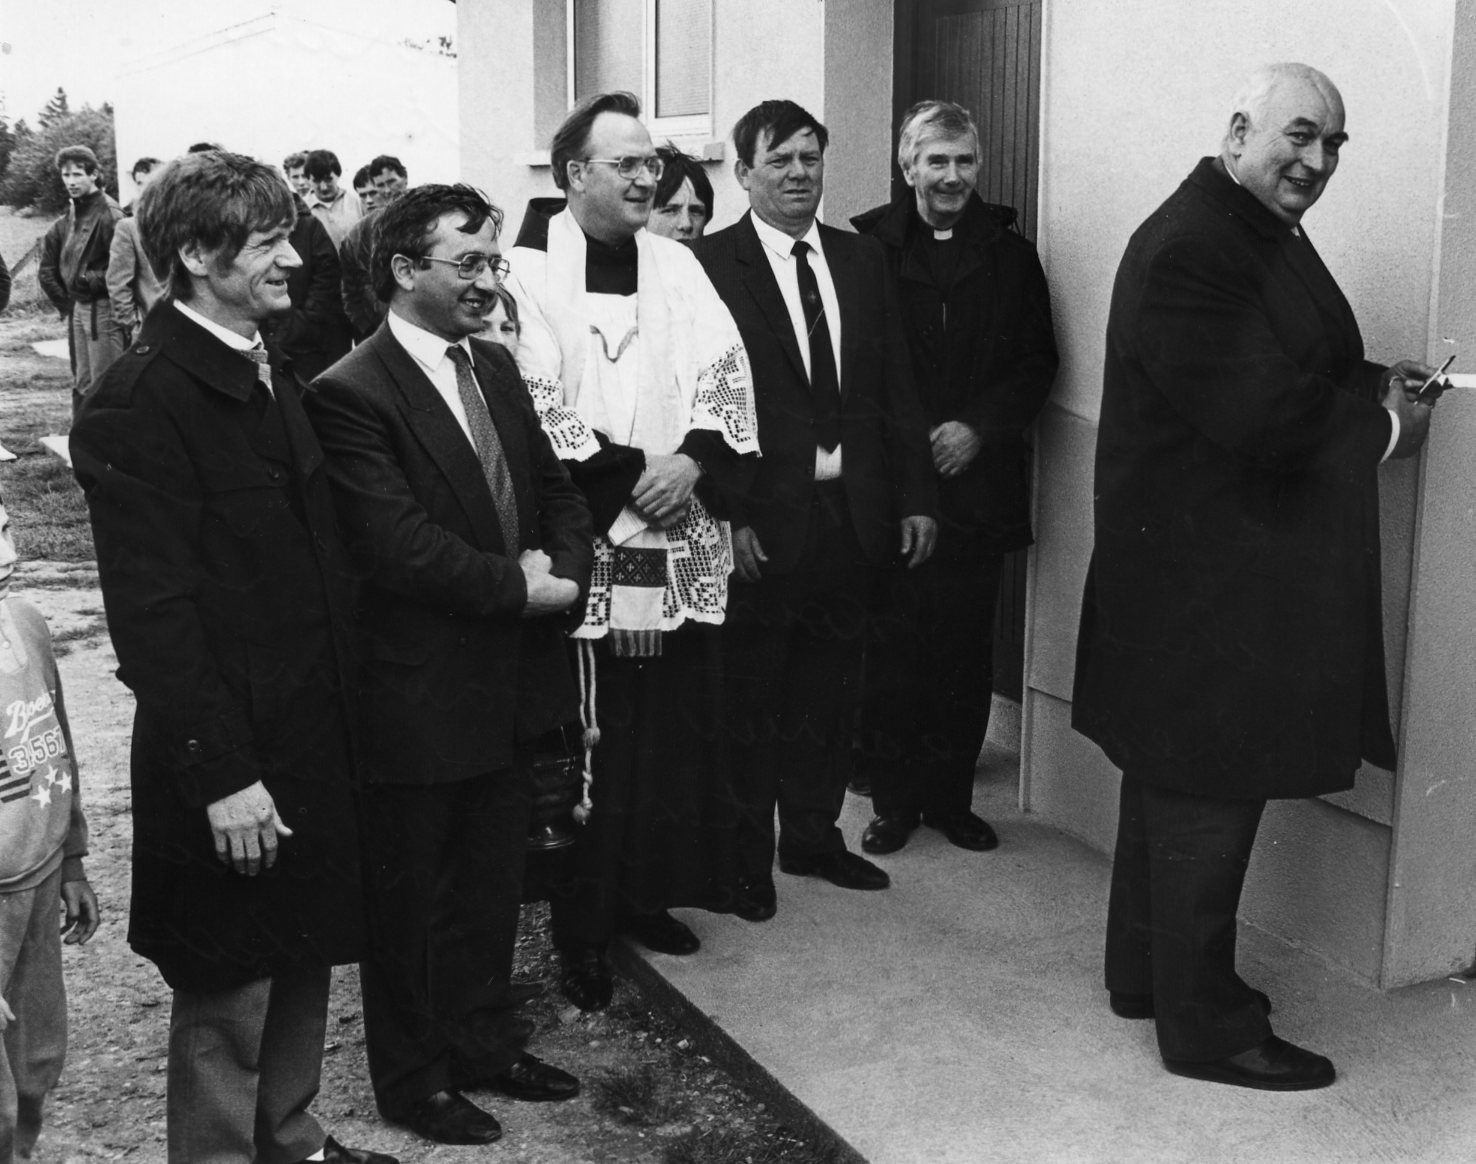 Jack Boothman, one of the few high-ranking Protestant GAA officials, presides at an official opening with members of the Catholic clergy. Boothman served as President of the Association between 1994 and 1997.